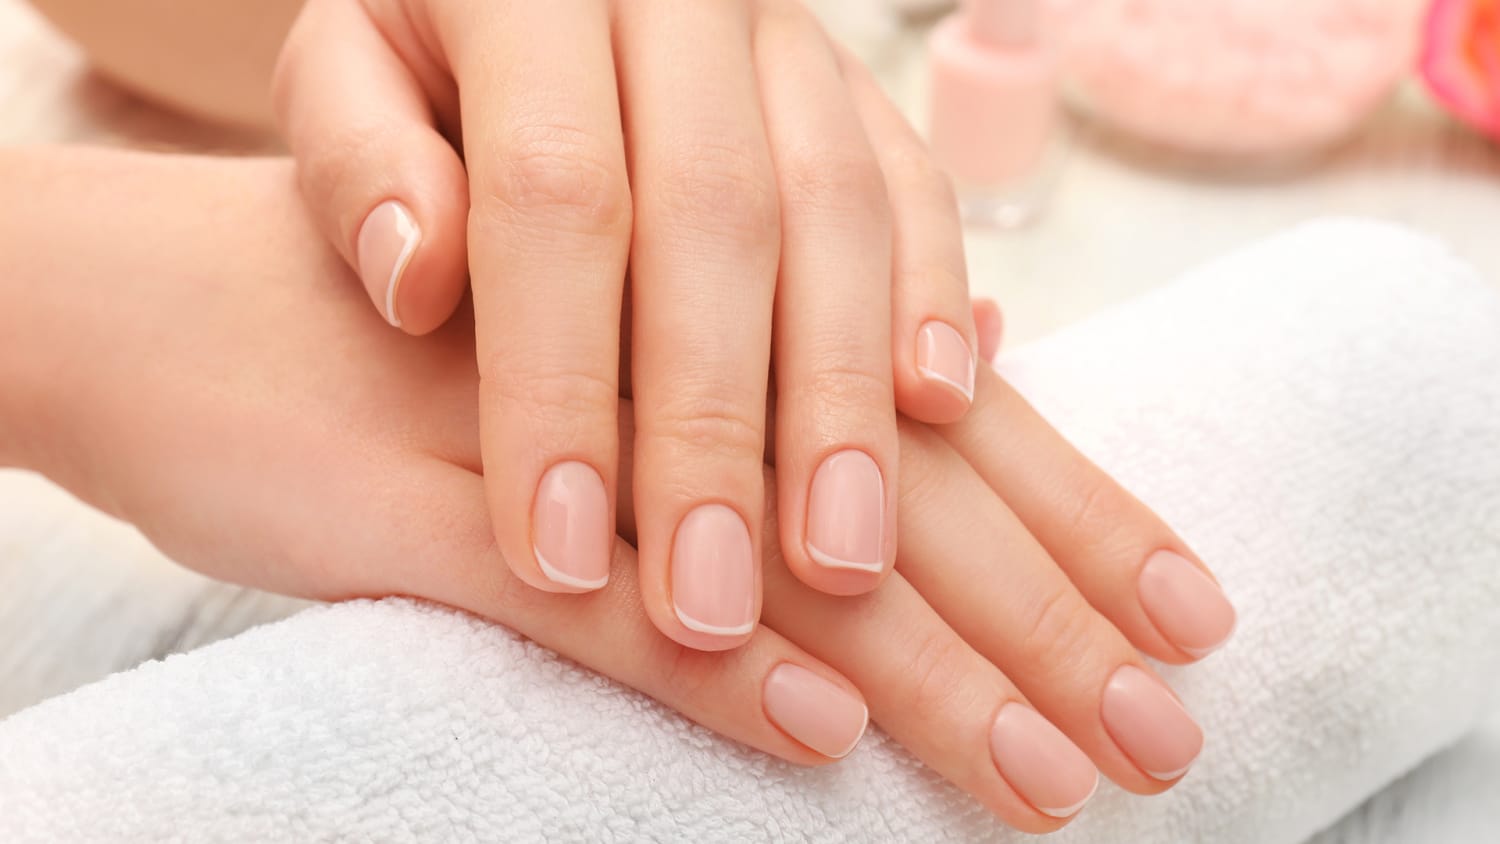 Could UV Light From Nail Polish Dryers Cause Cancer